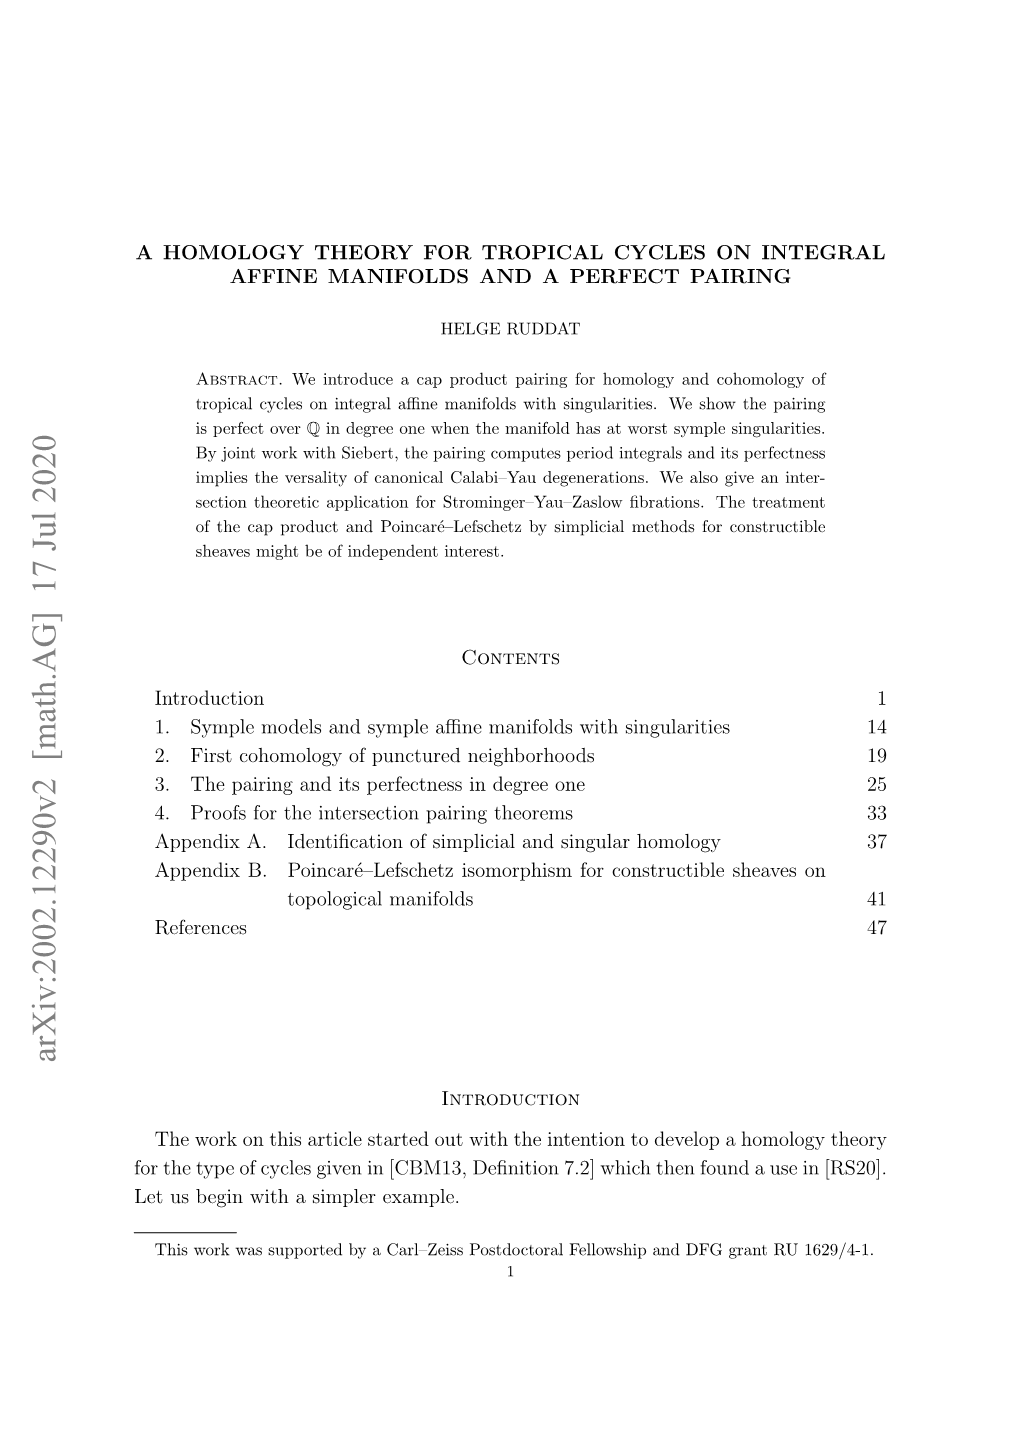 A Homology Theory for Tropical Cycles on Integral Affine Manifolds and a Perfect Pairing